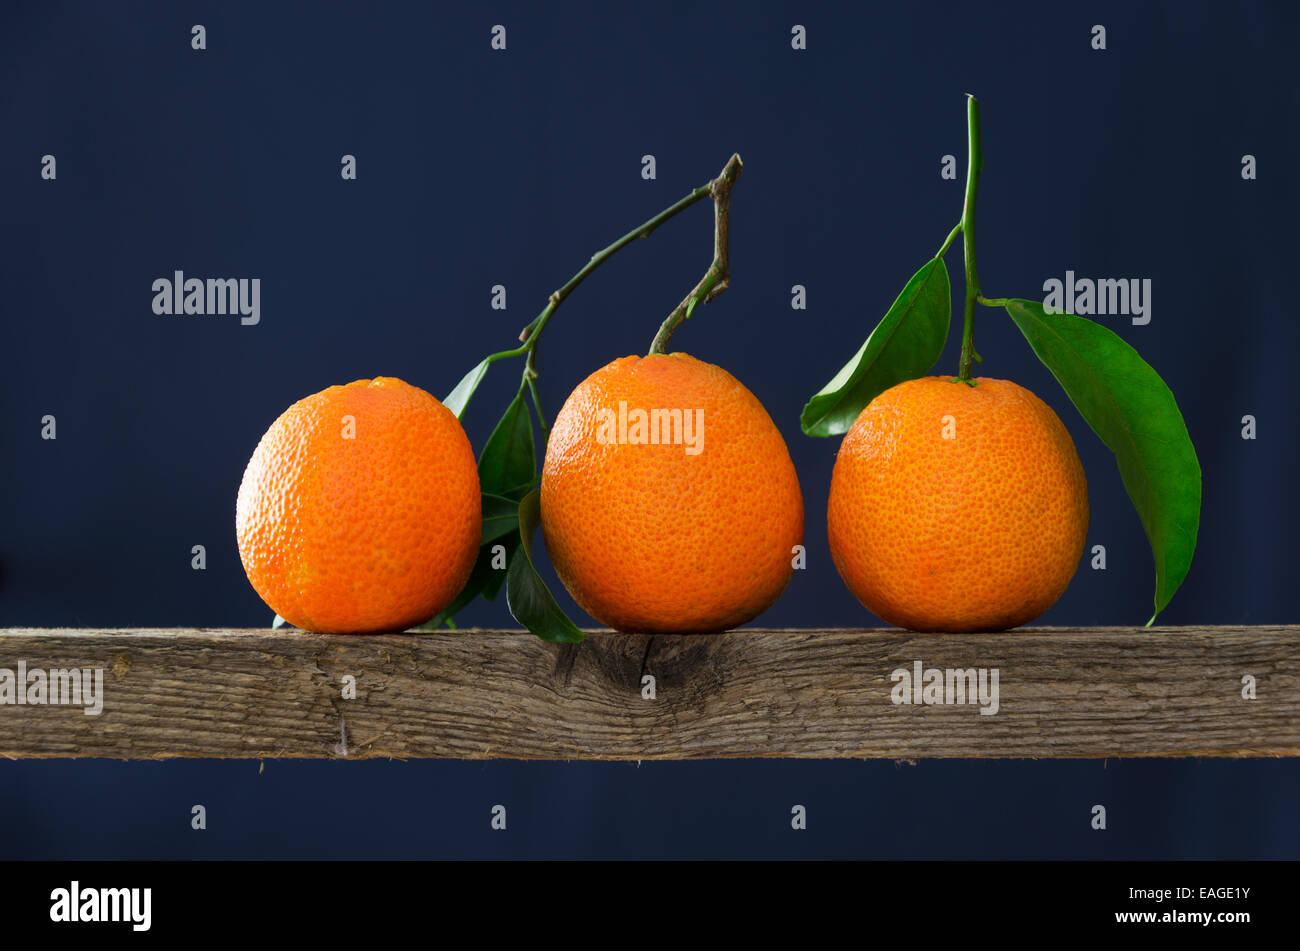 Three ripe tangerines aligned on a wooden board Stock Photo